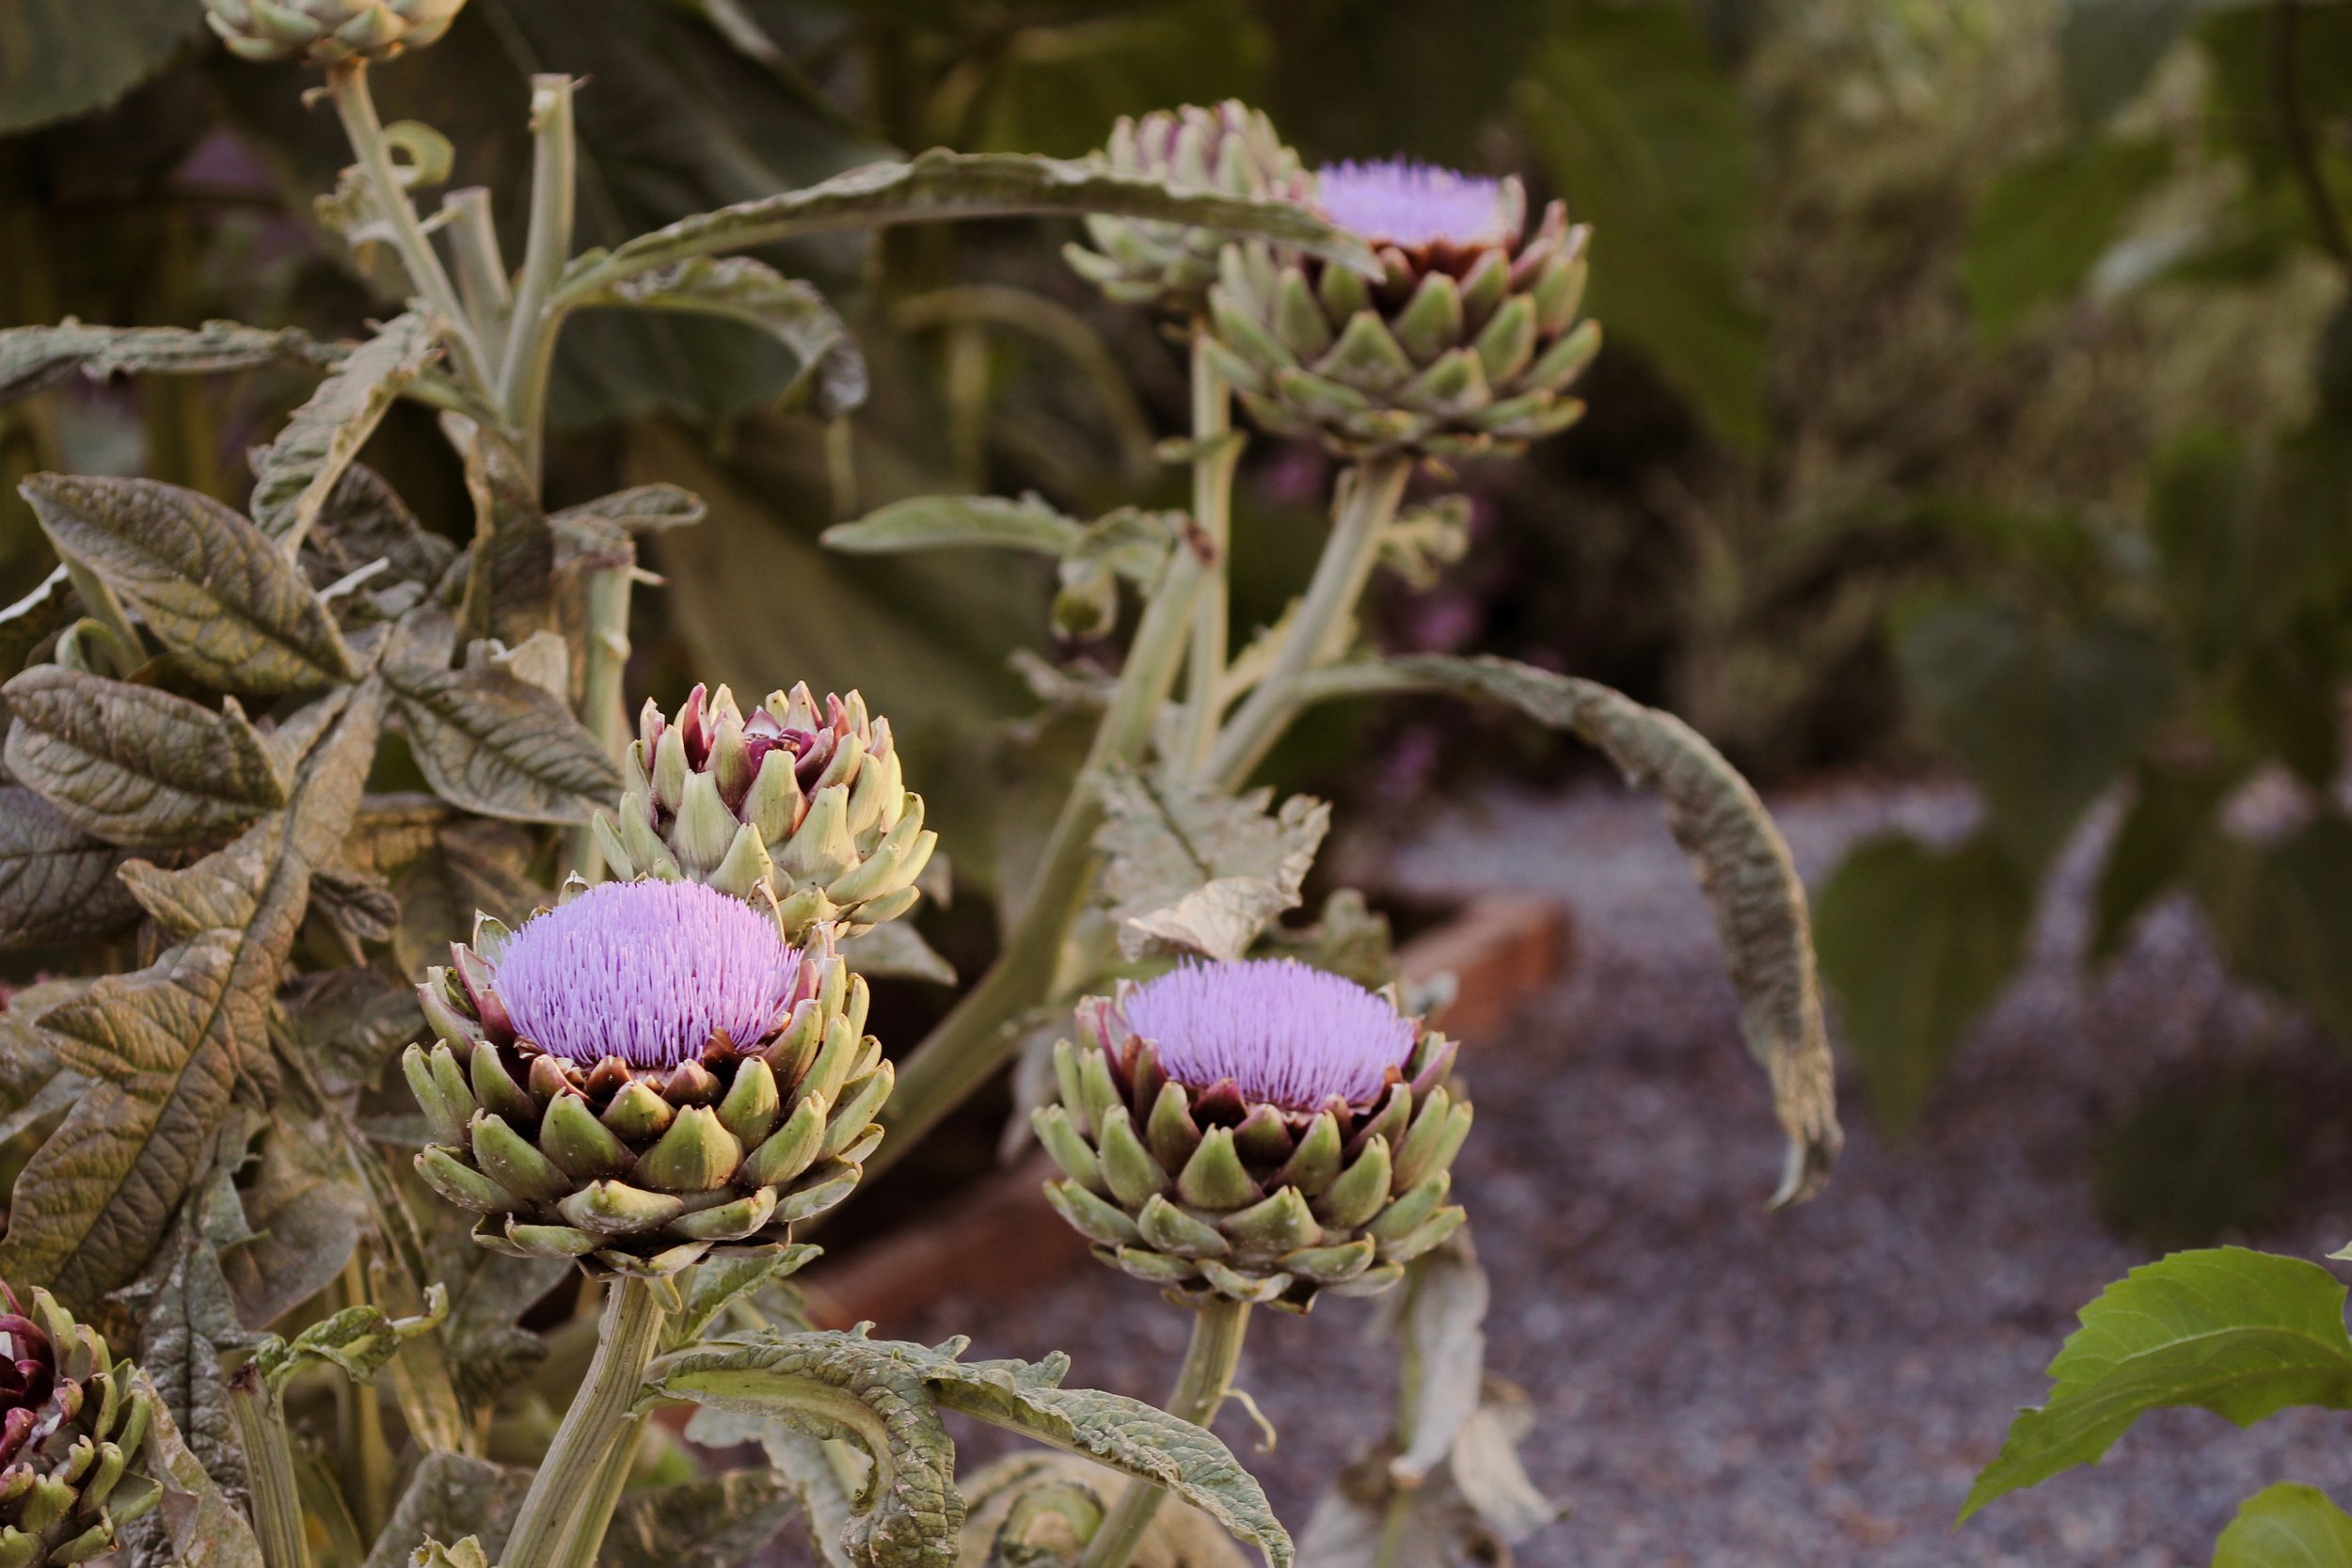 Blooming artichokes serve both decorative and pollinator-supporting purposes in the garden